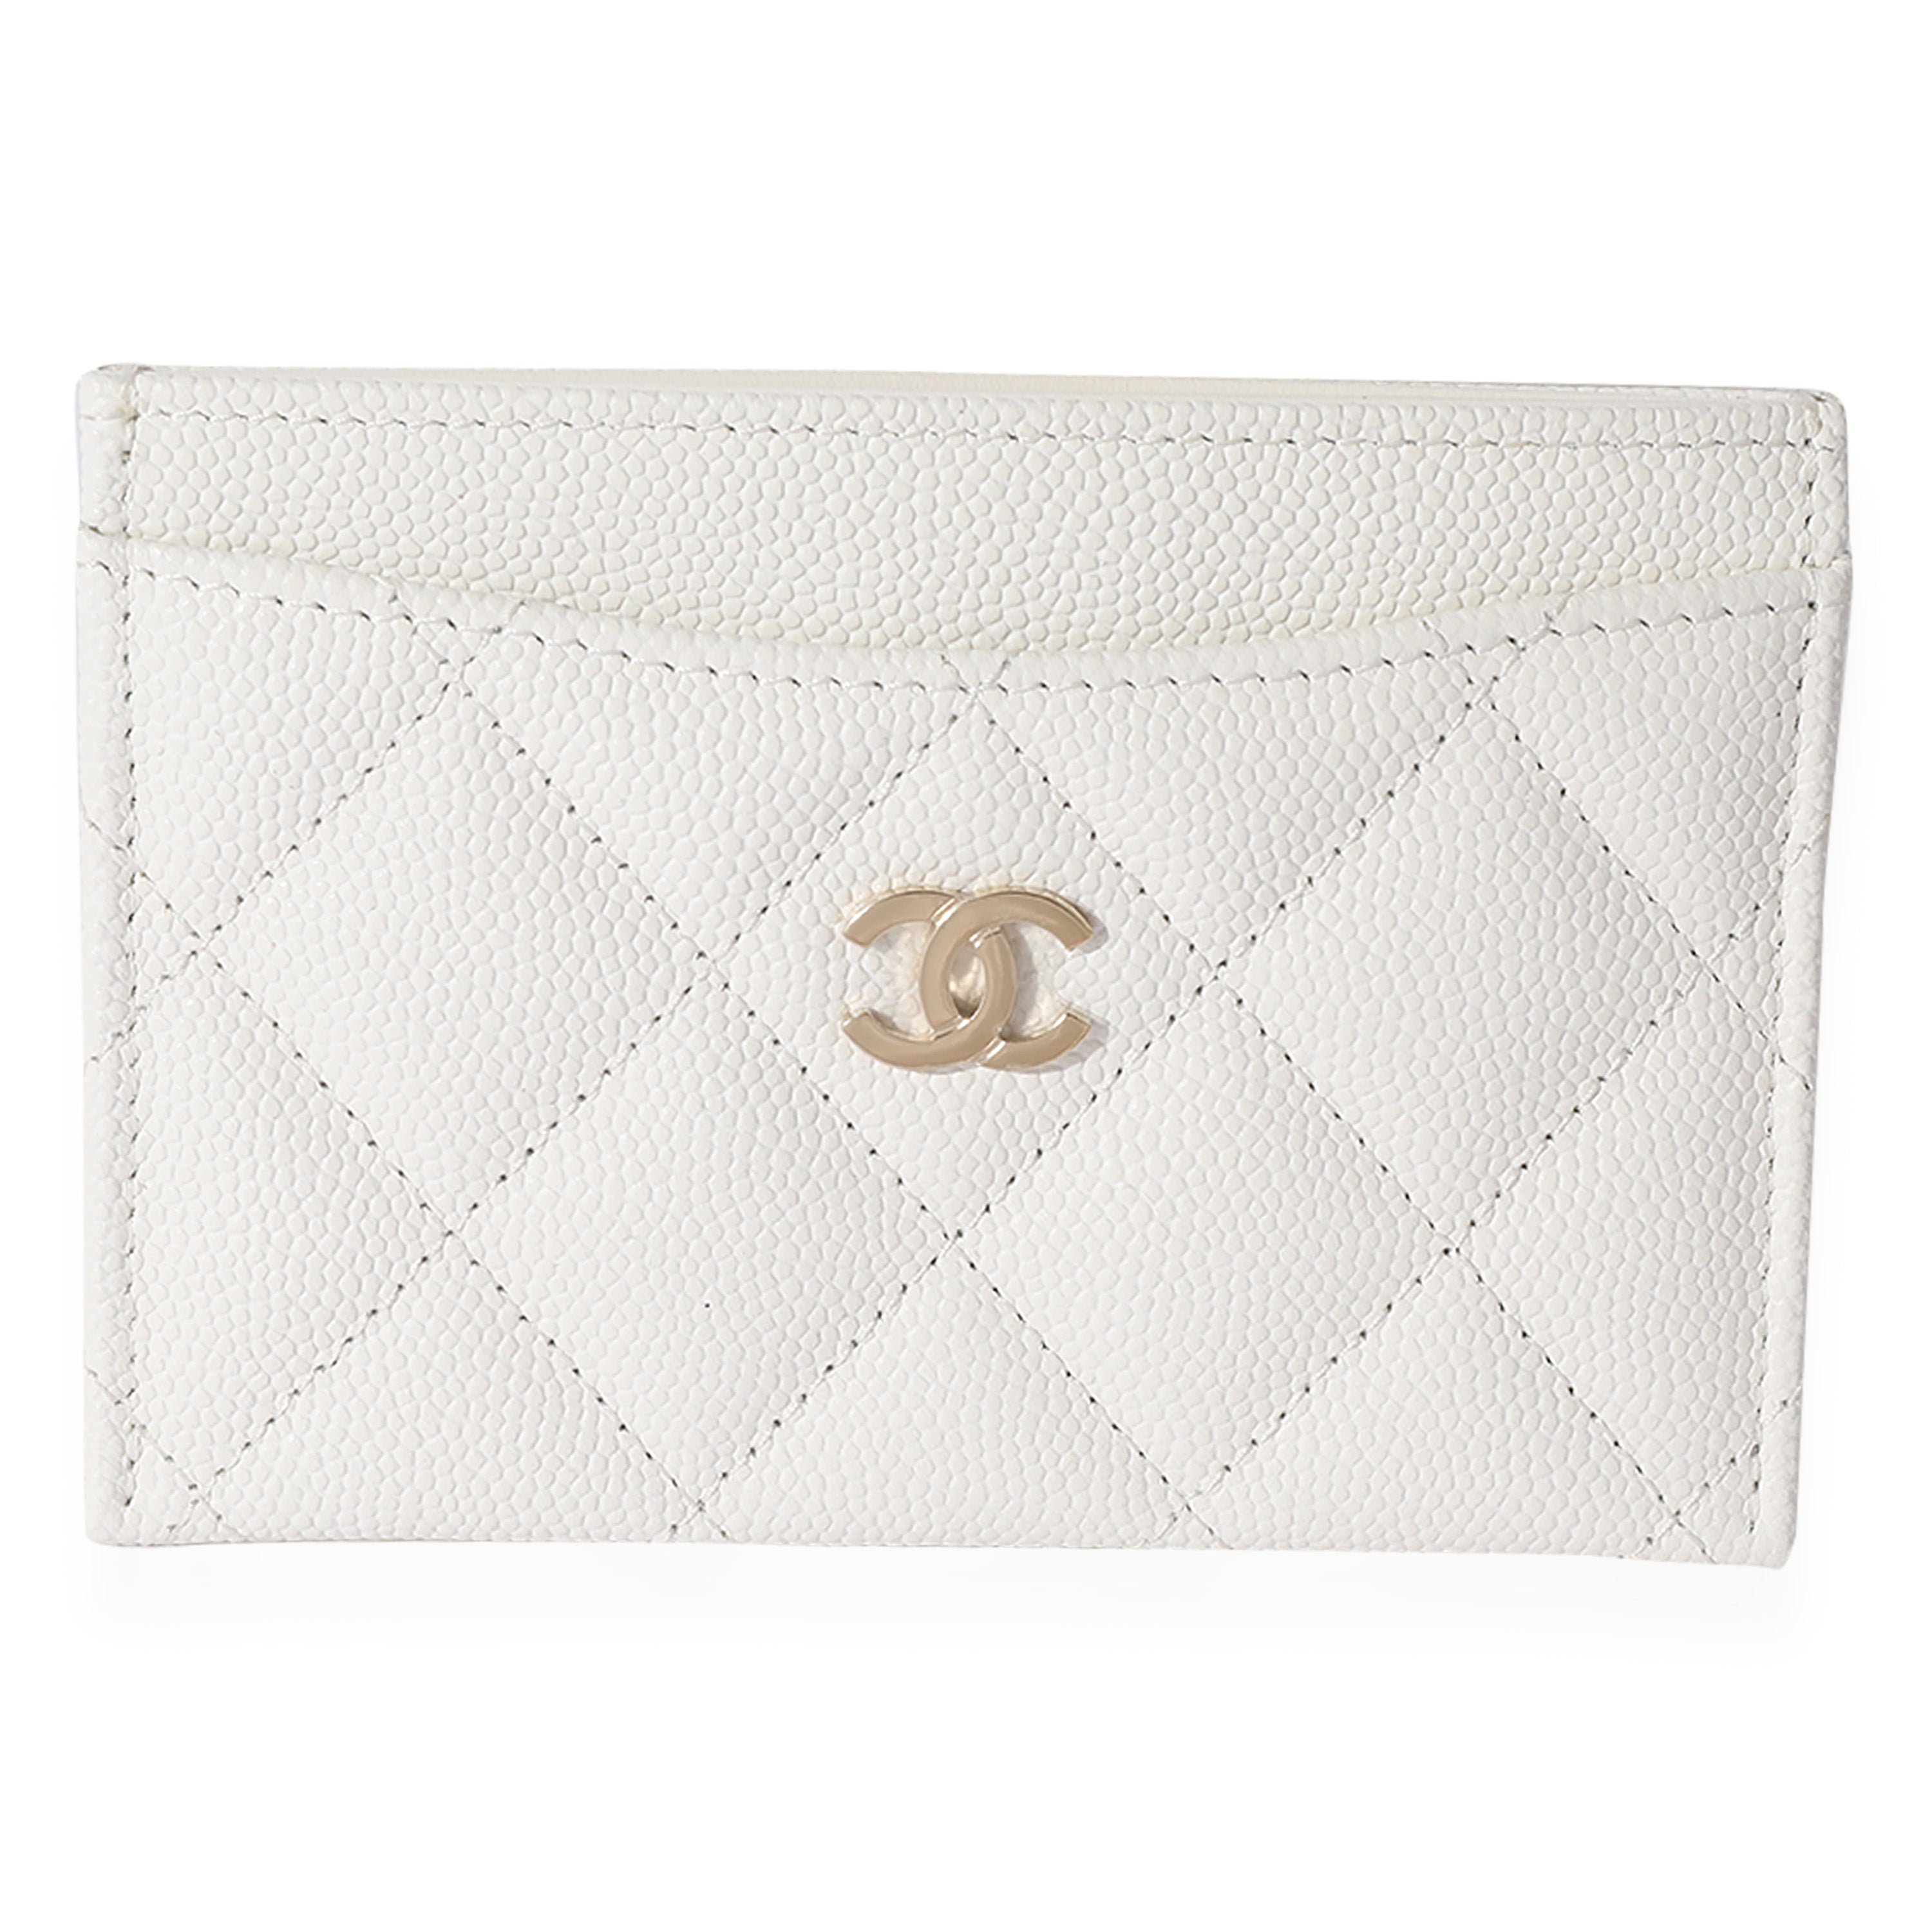 CHANEL Caviar Quilted Card Holder Green 611549